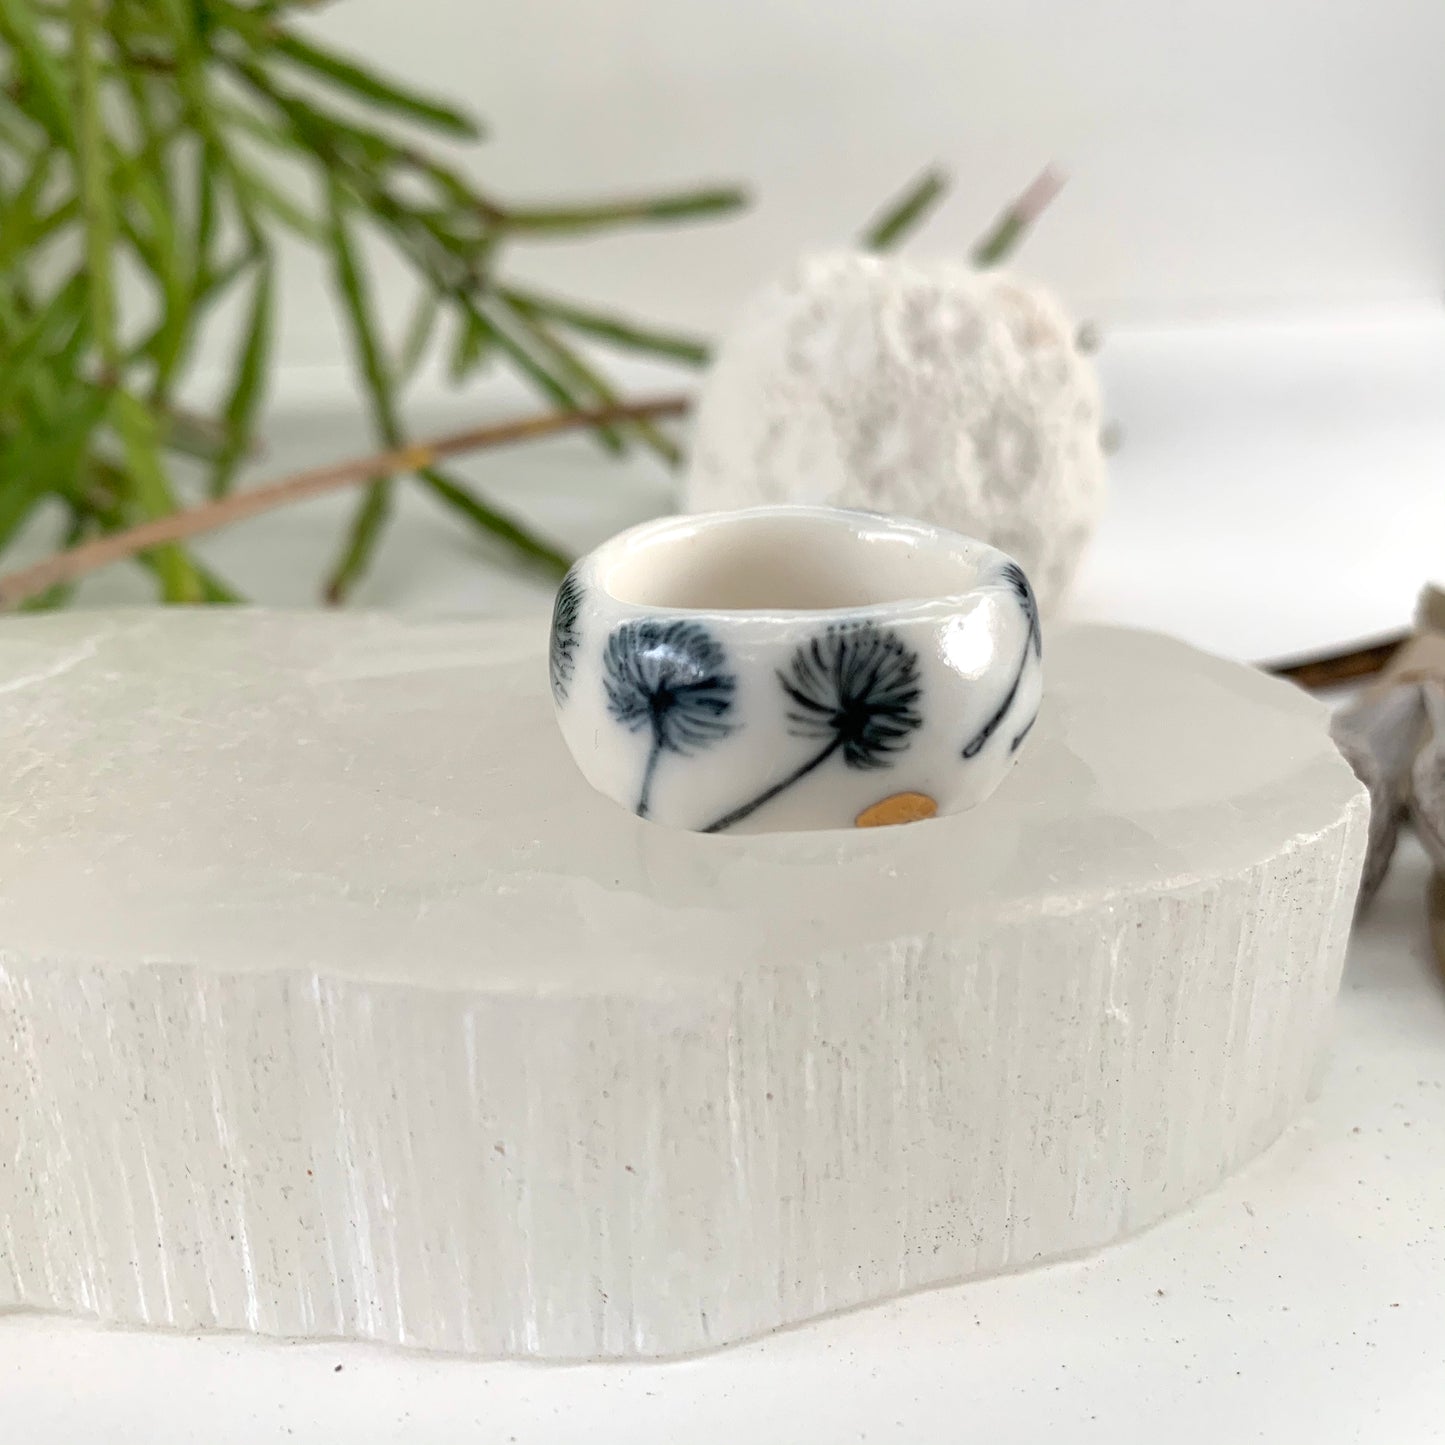 One blue and white ‘seafoam’ band ring